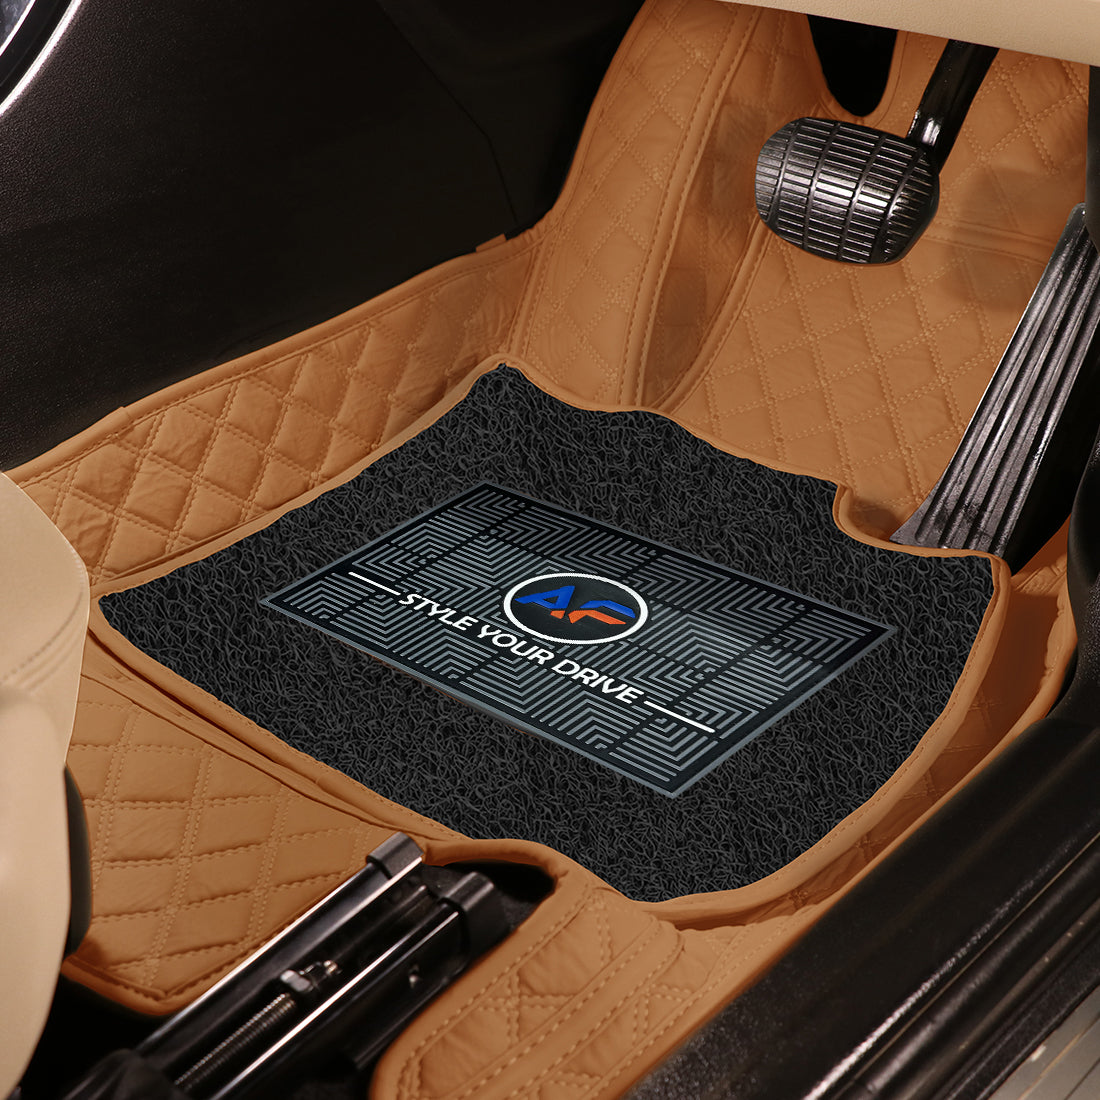 Jeep Meridian 2022-7D Luxury Car Mat, All Weather Proof, Anti-Skid, 100% Waterproof & Odorless with Unique Diamond Fish Design (24mm Luxury PU Leather, 2 Rows)